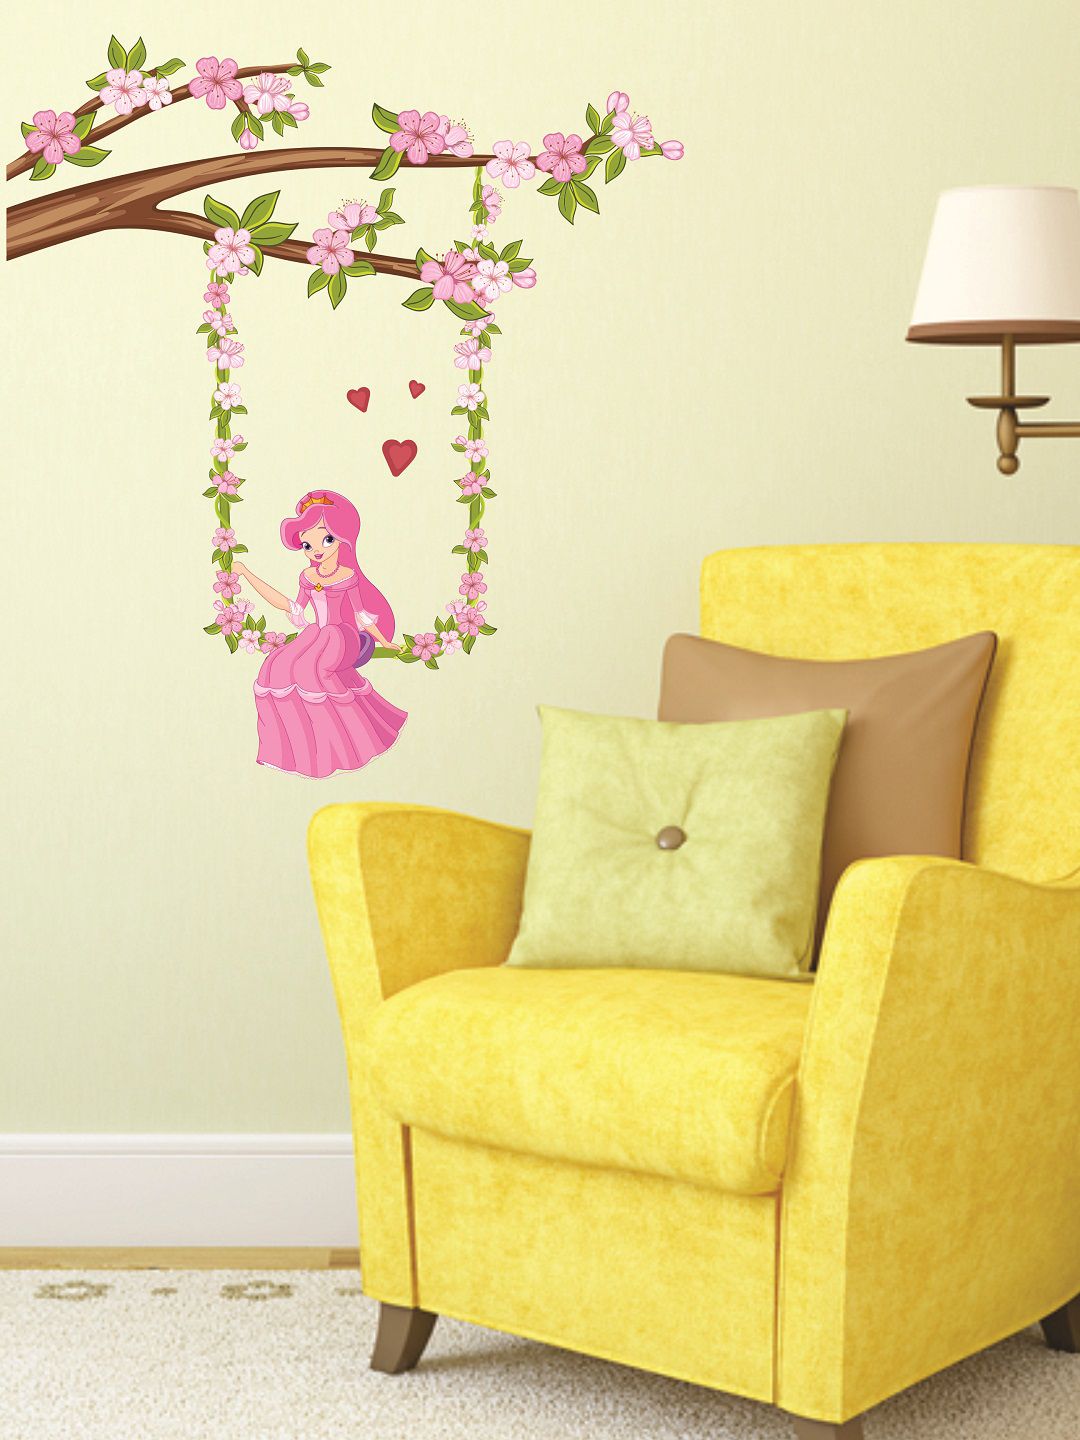 WALLSTICK Pink & Green Girl On Swing Large Vinyl Wall Sticker Price in India